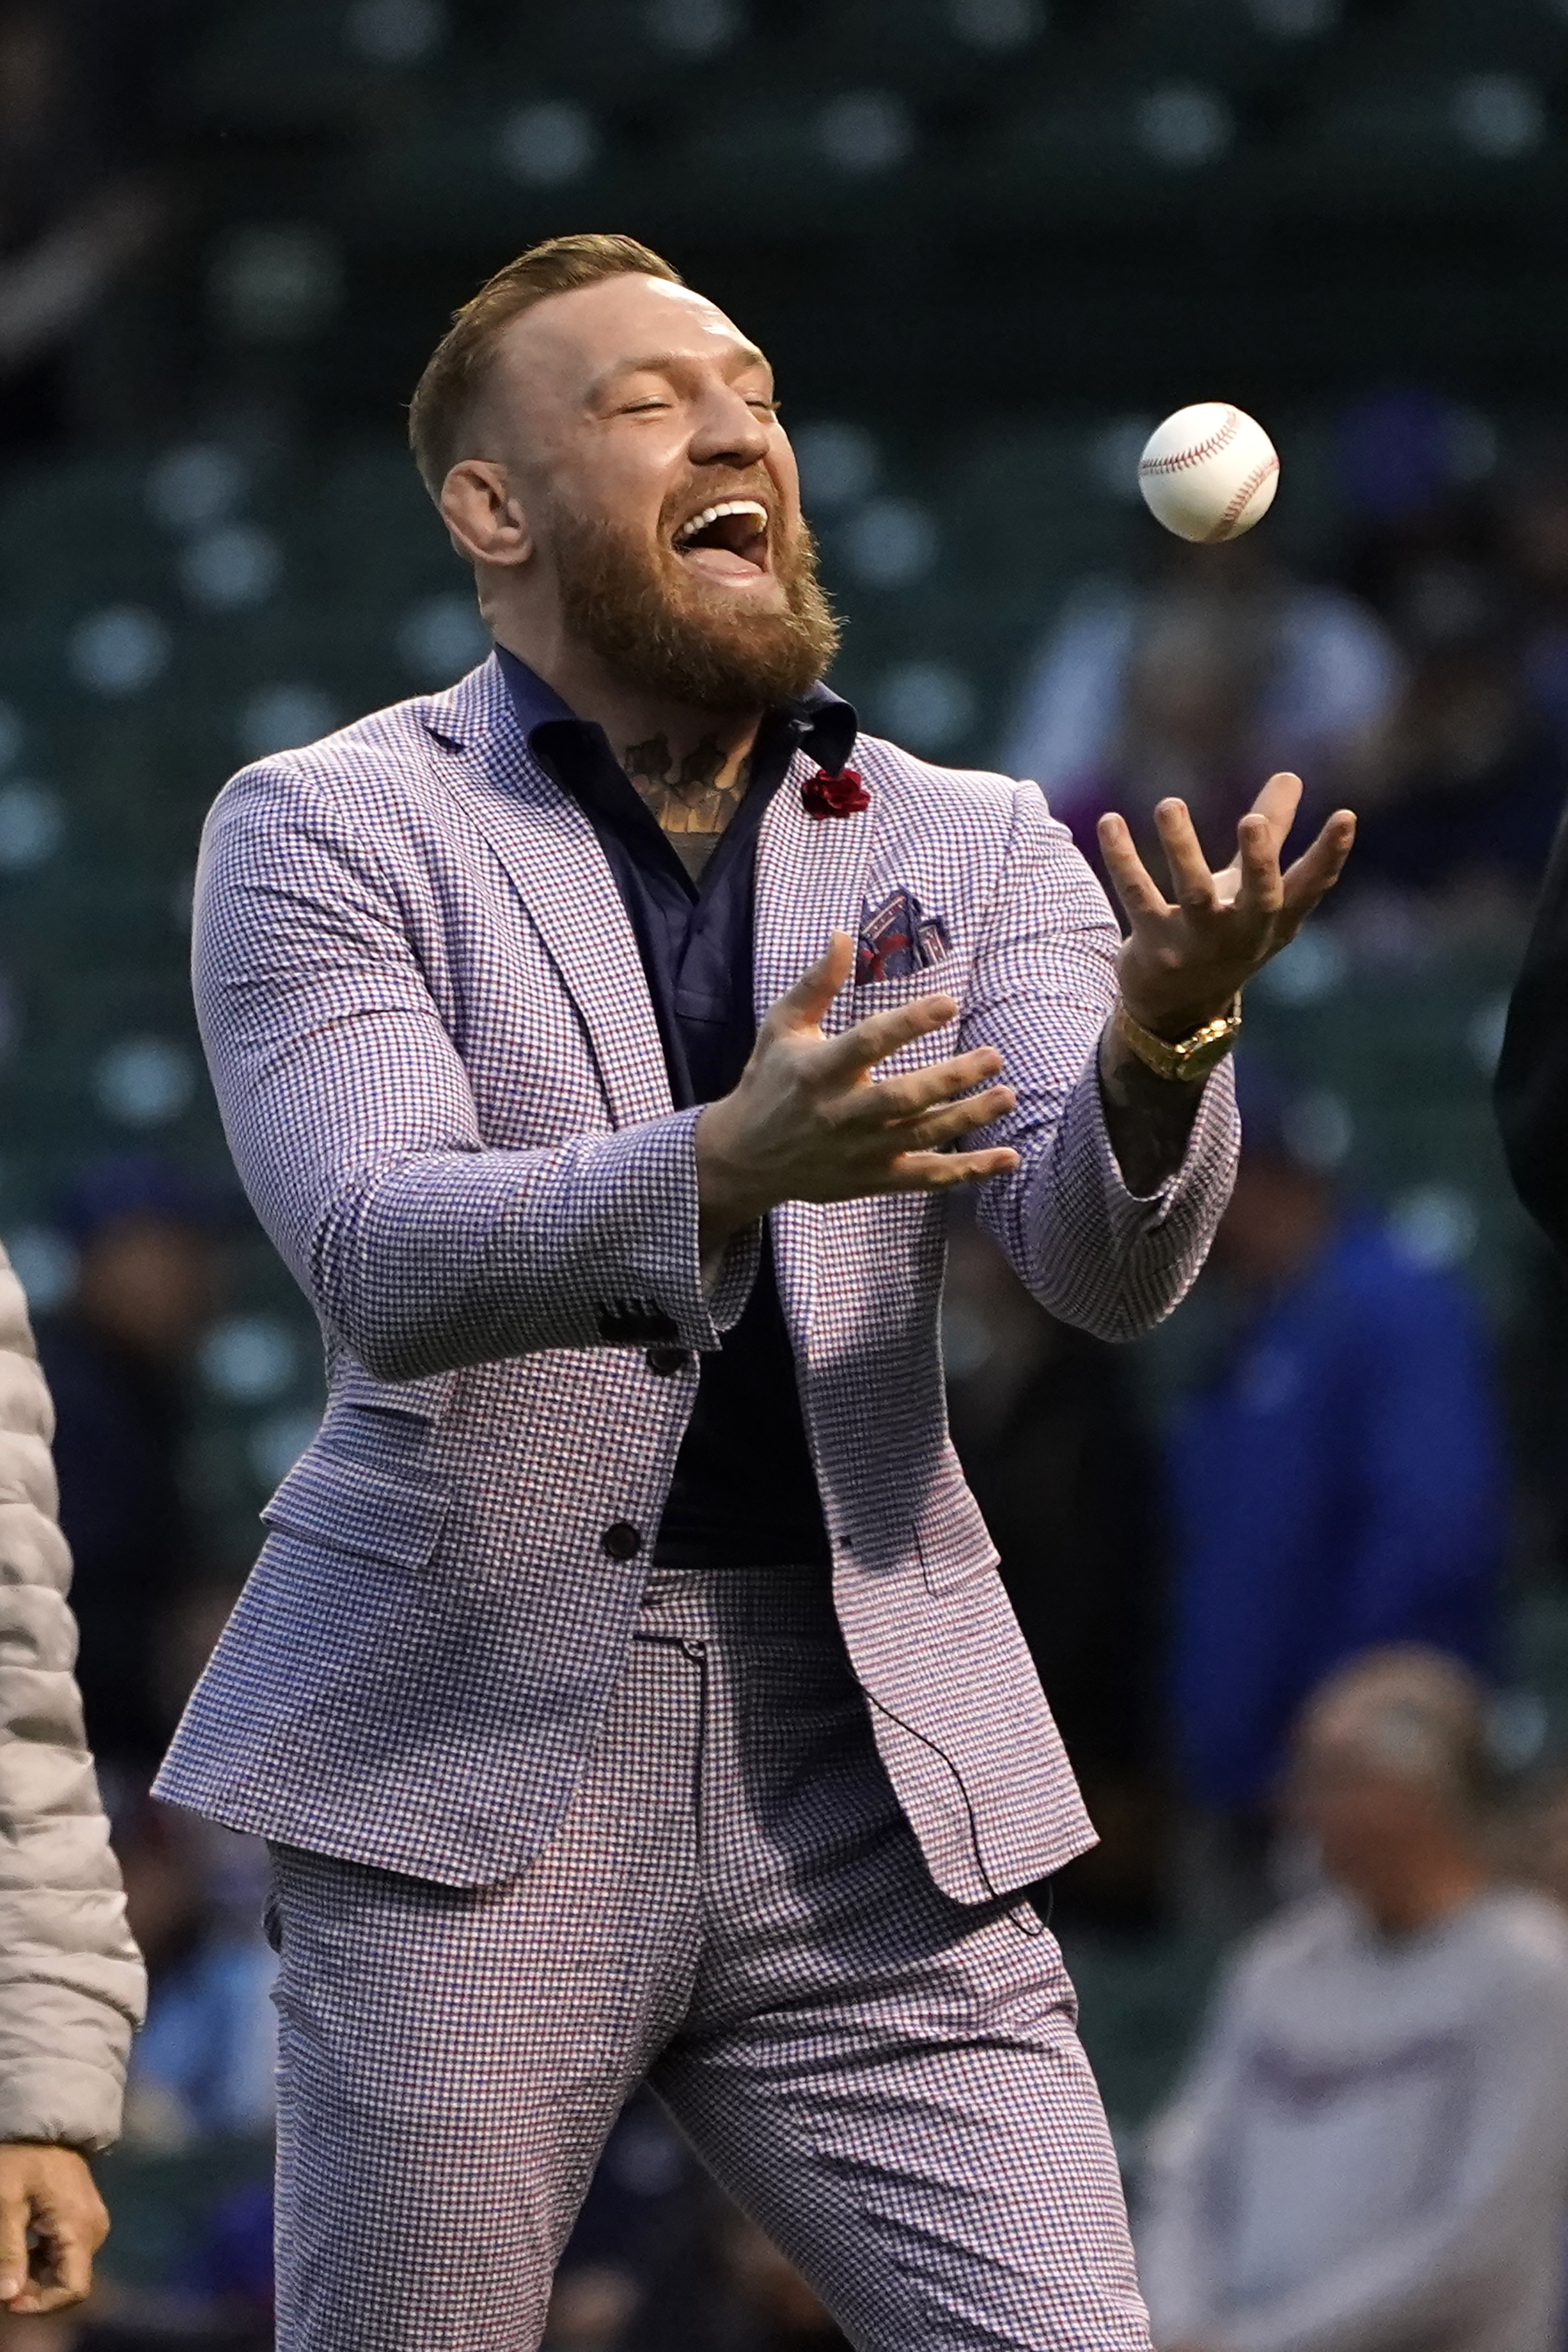 Conor McGregor Hits Back After Throwing 'Worst Baseball Pitch In History'